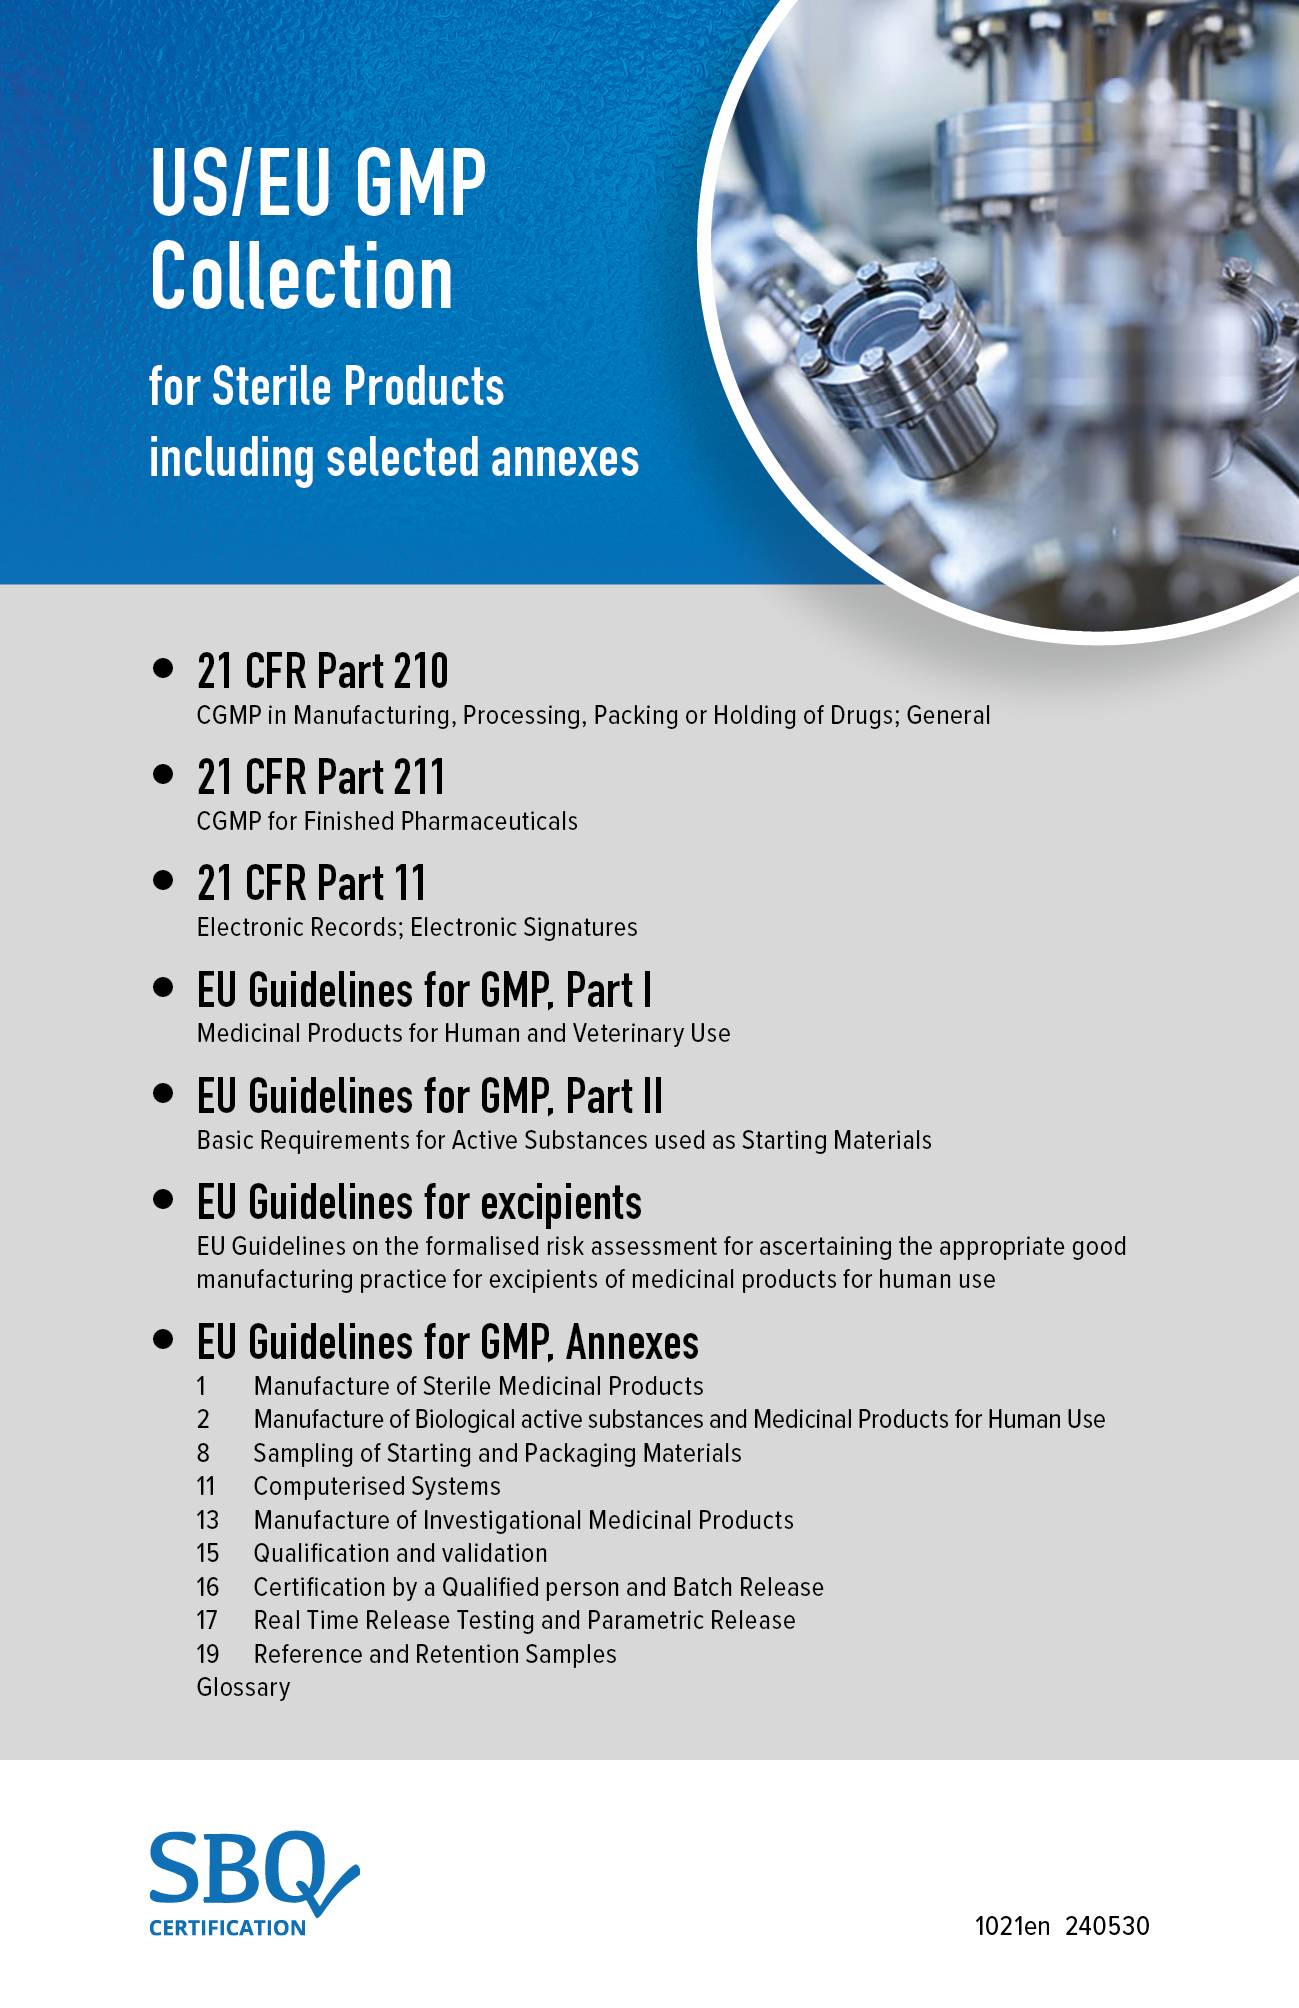 GMPs for Sterile products